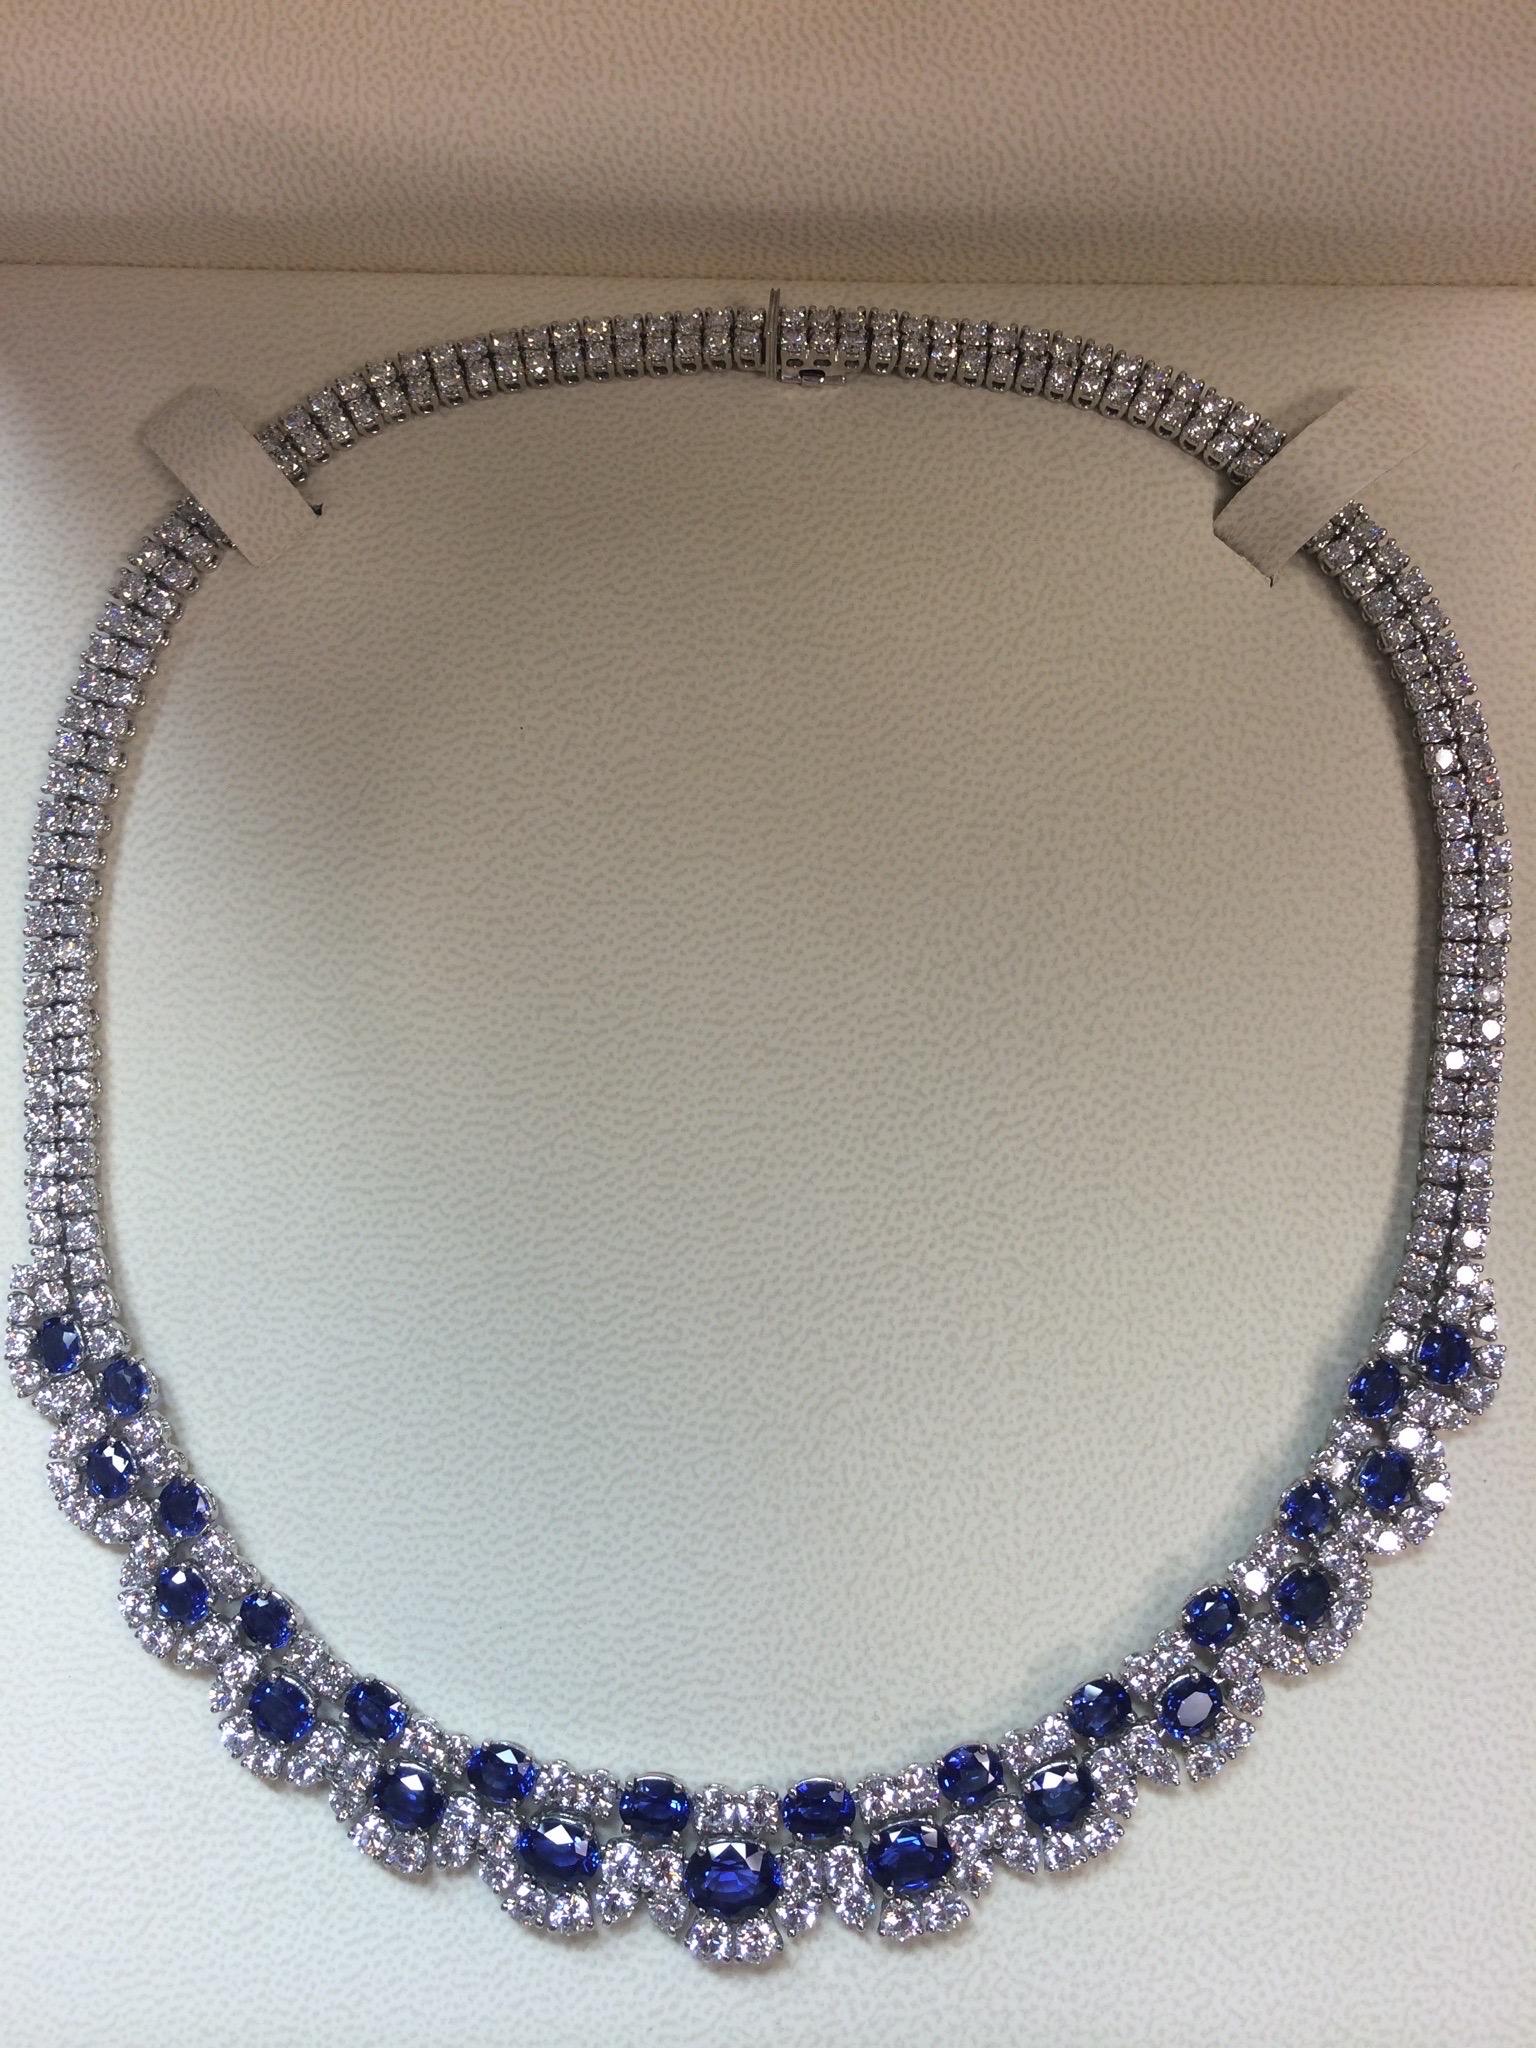 Modern Gold 37 Carat Natural Colorless Diamond & Blue Sapphire Italian Necklace For Sale 1